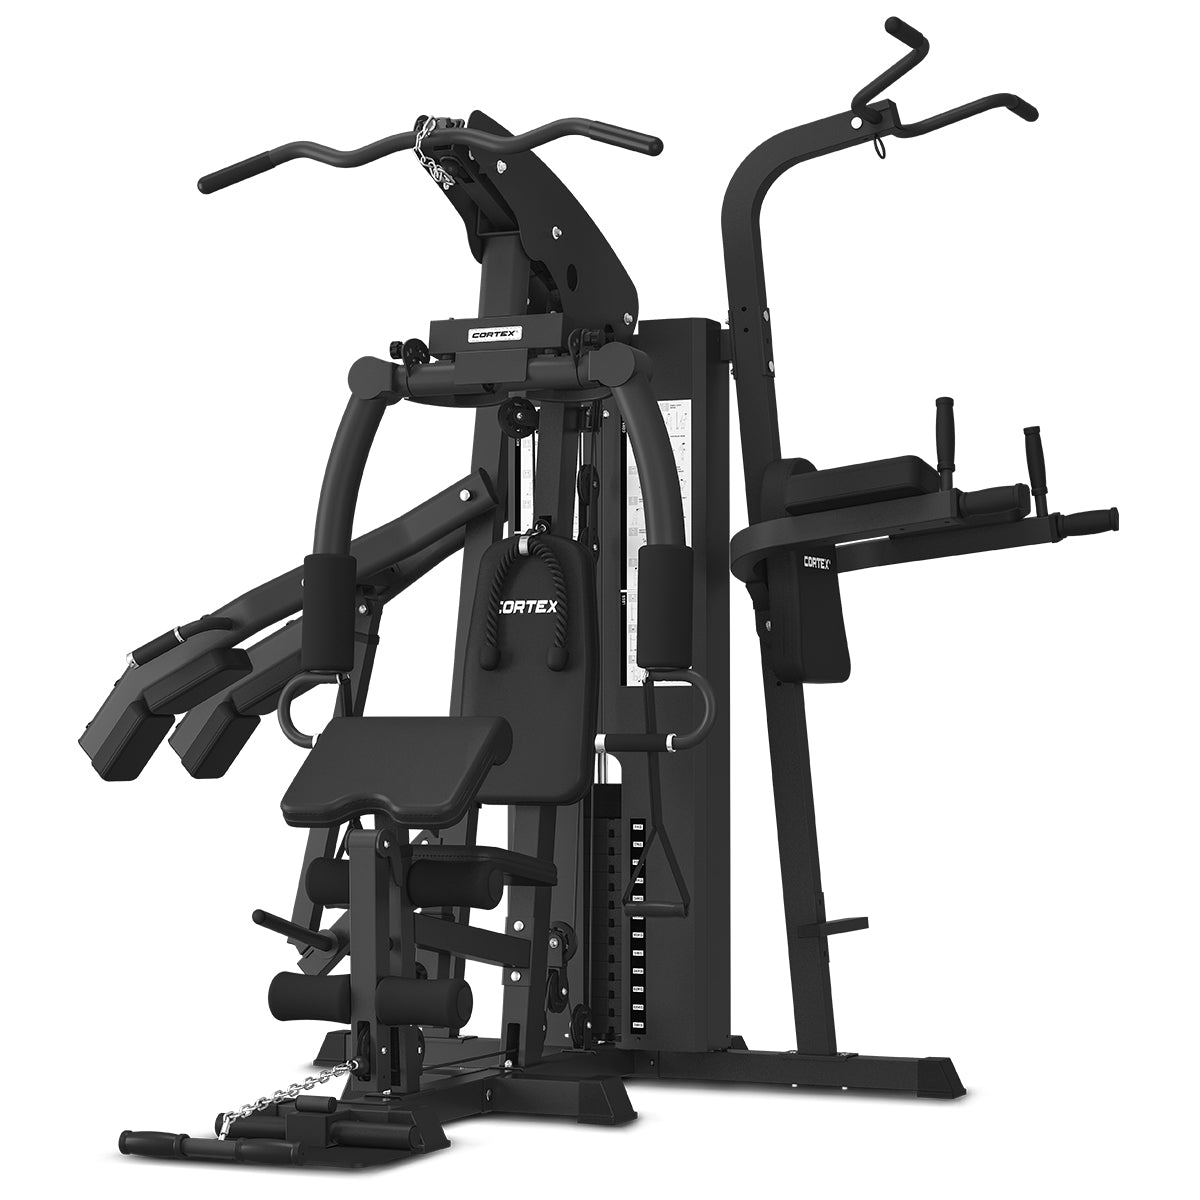 CORTEX GS7 Home Gym with 98kg Stack + 60kg Weight Package